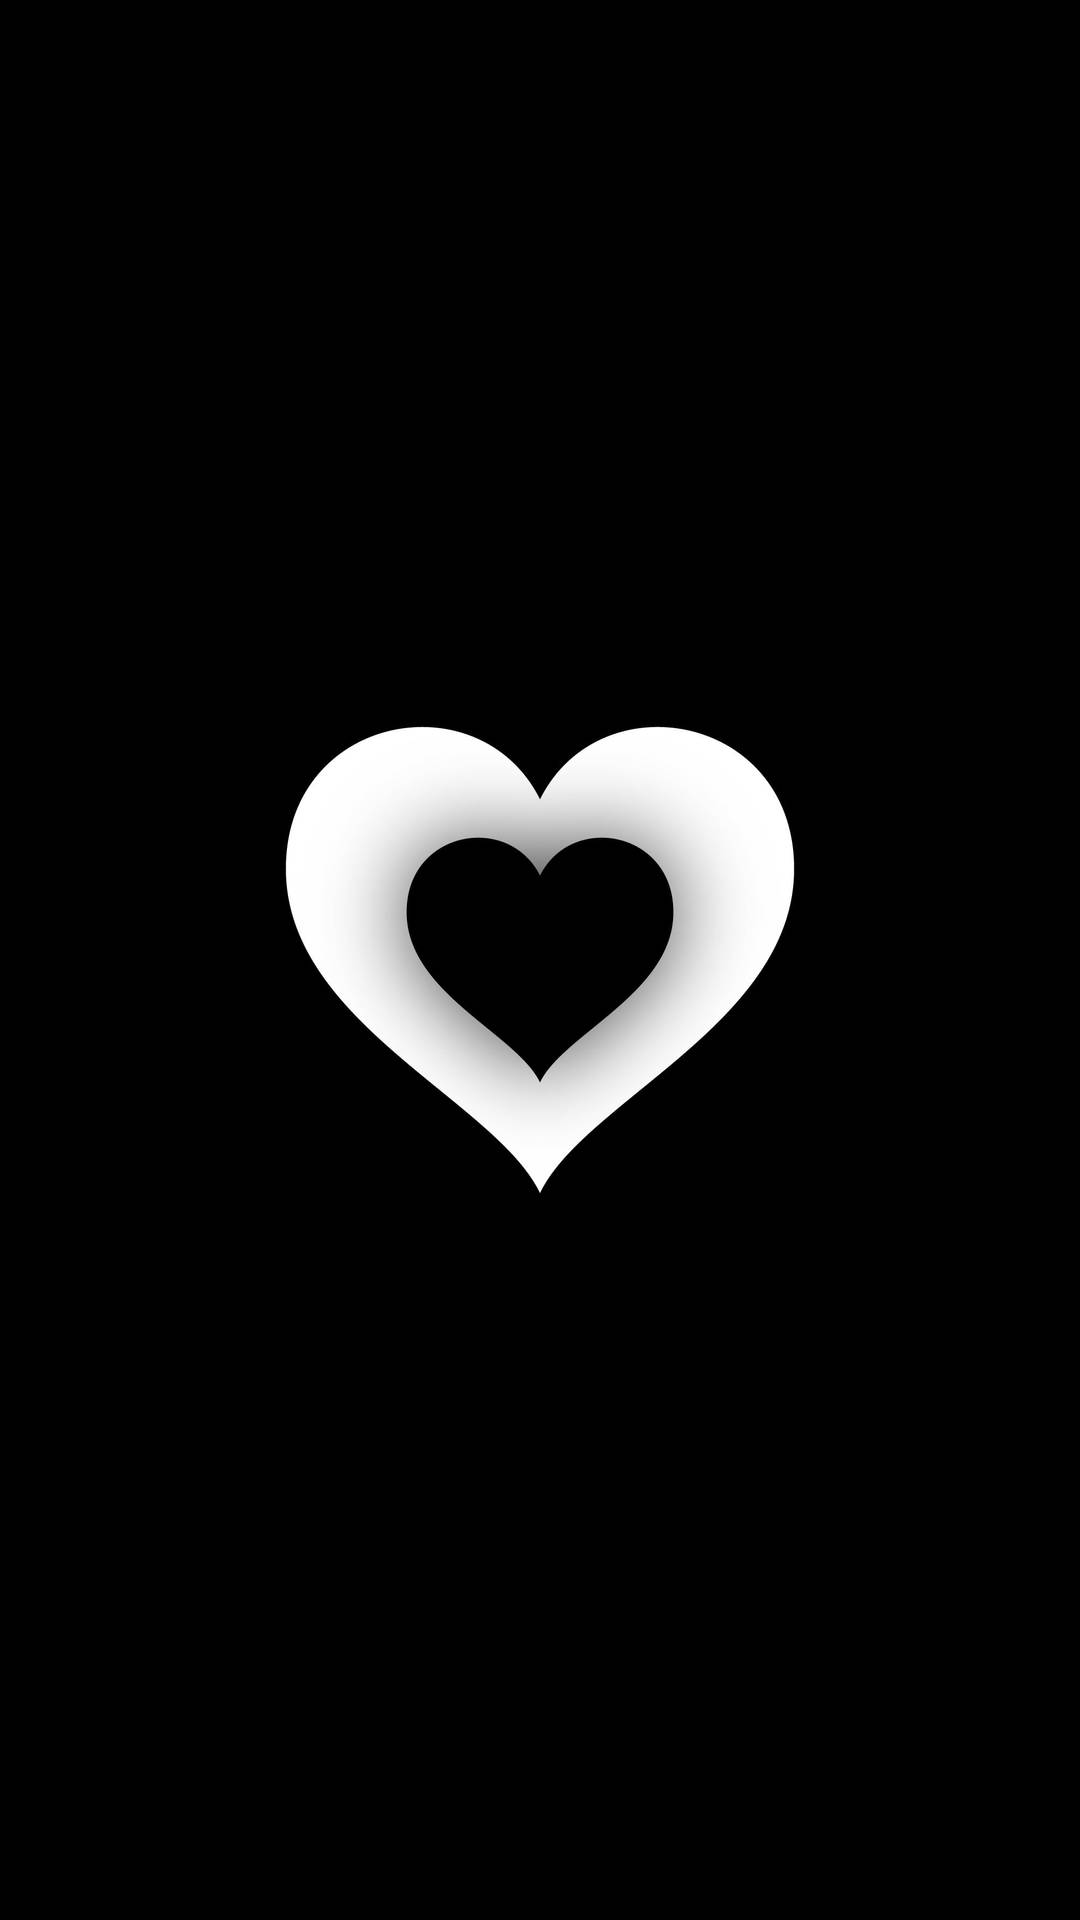 Download Double Black And White Heart Wallpaper 